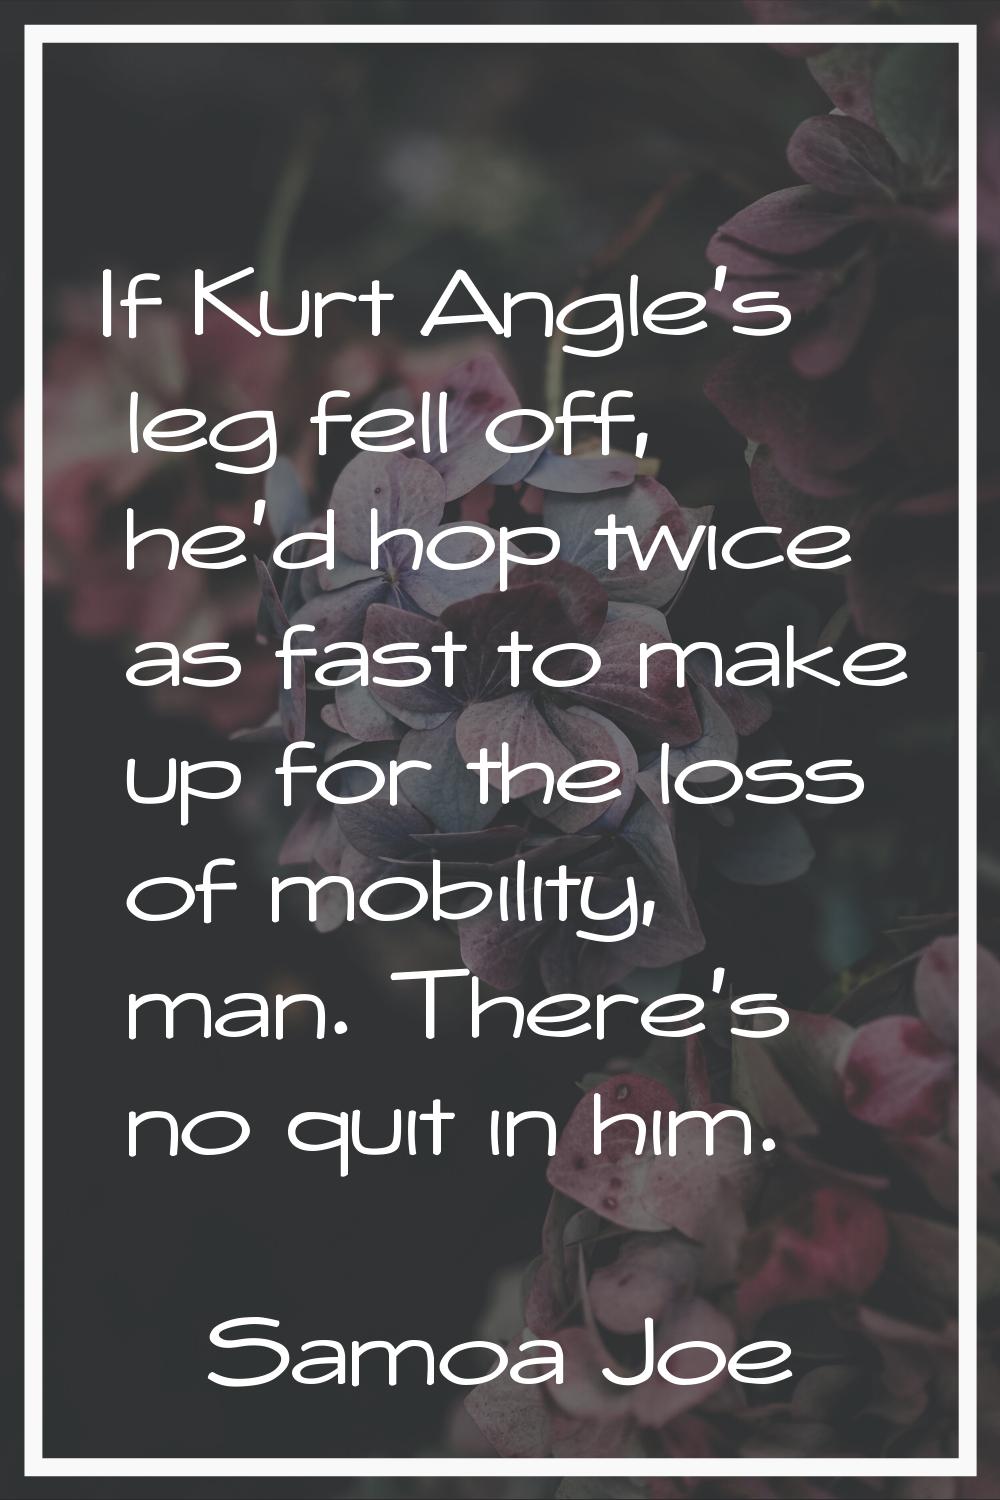 If Kurt Angle's leg fell off, he'd hop twice as fast to make up for the loss of mobility, man. Ther